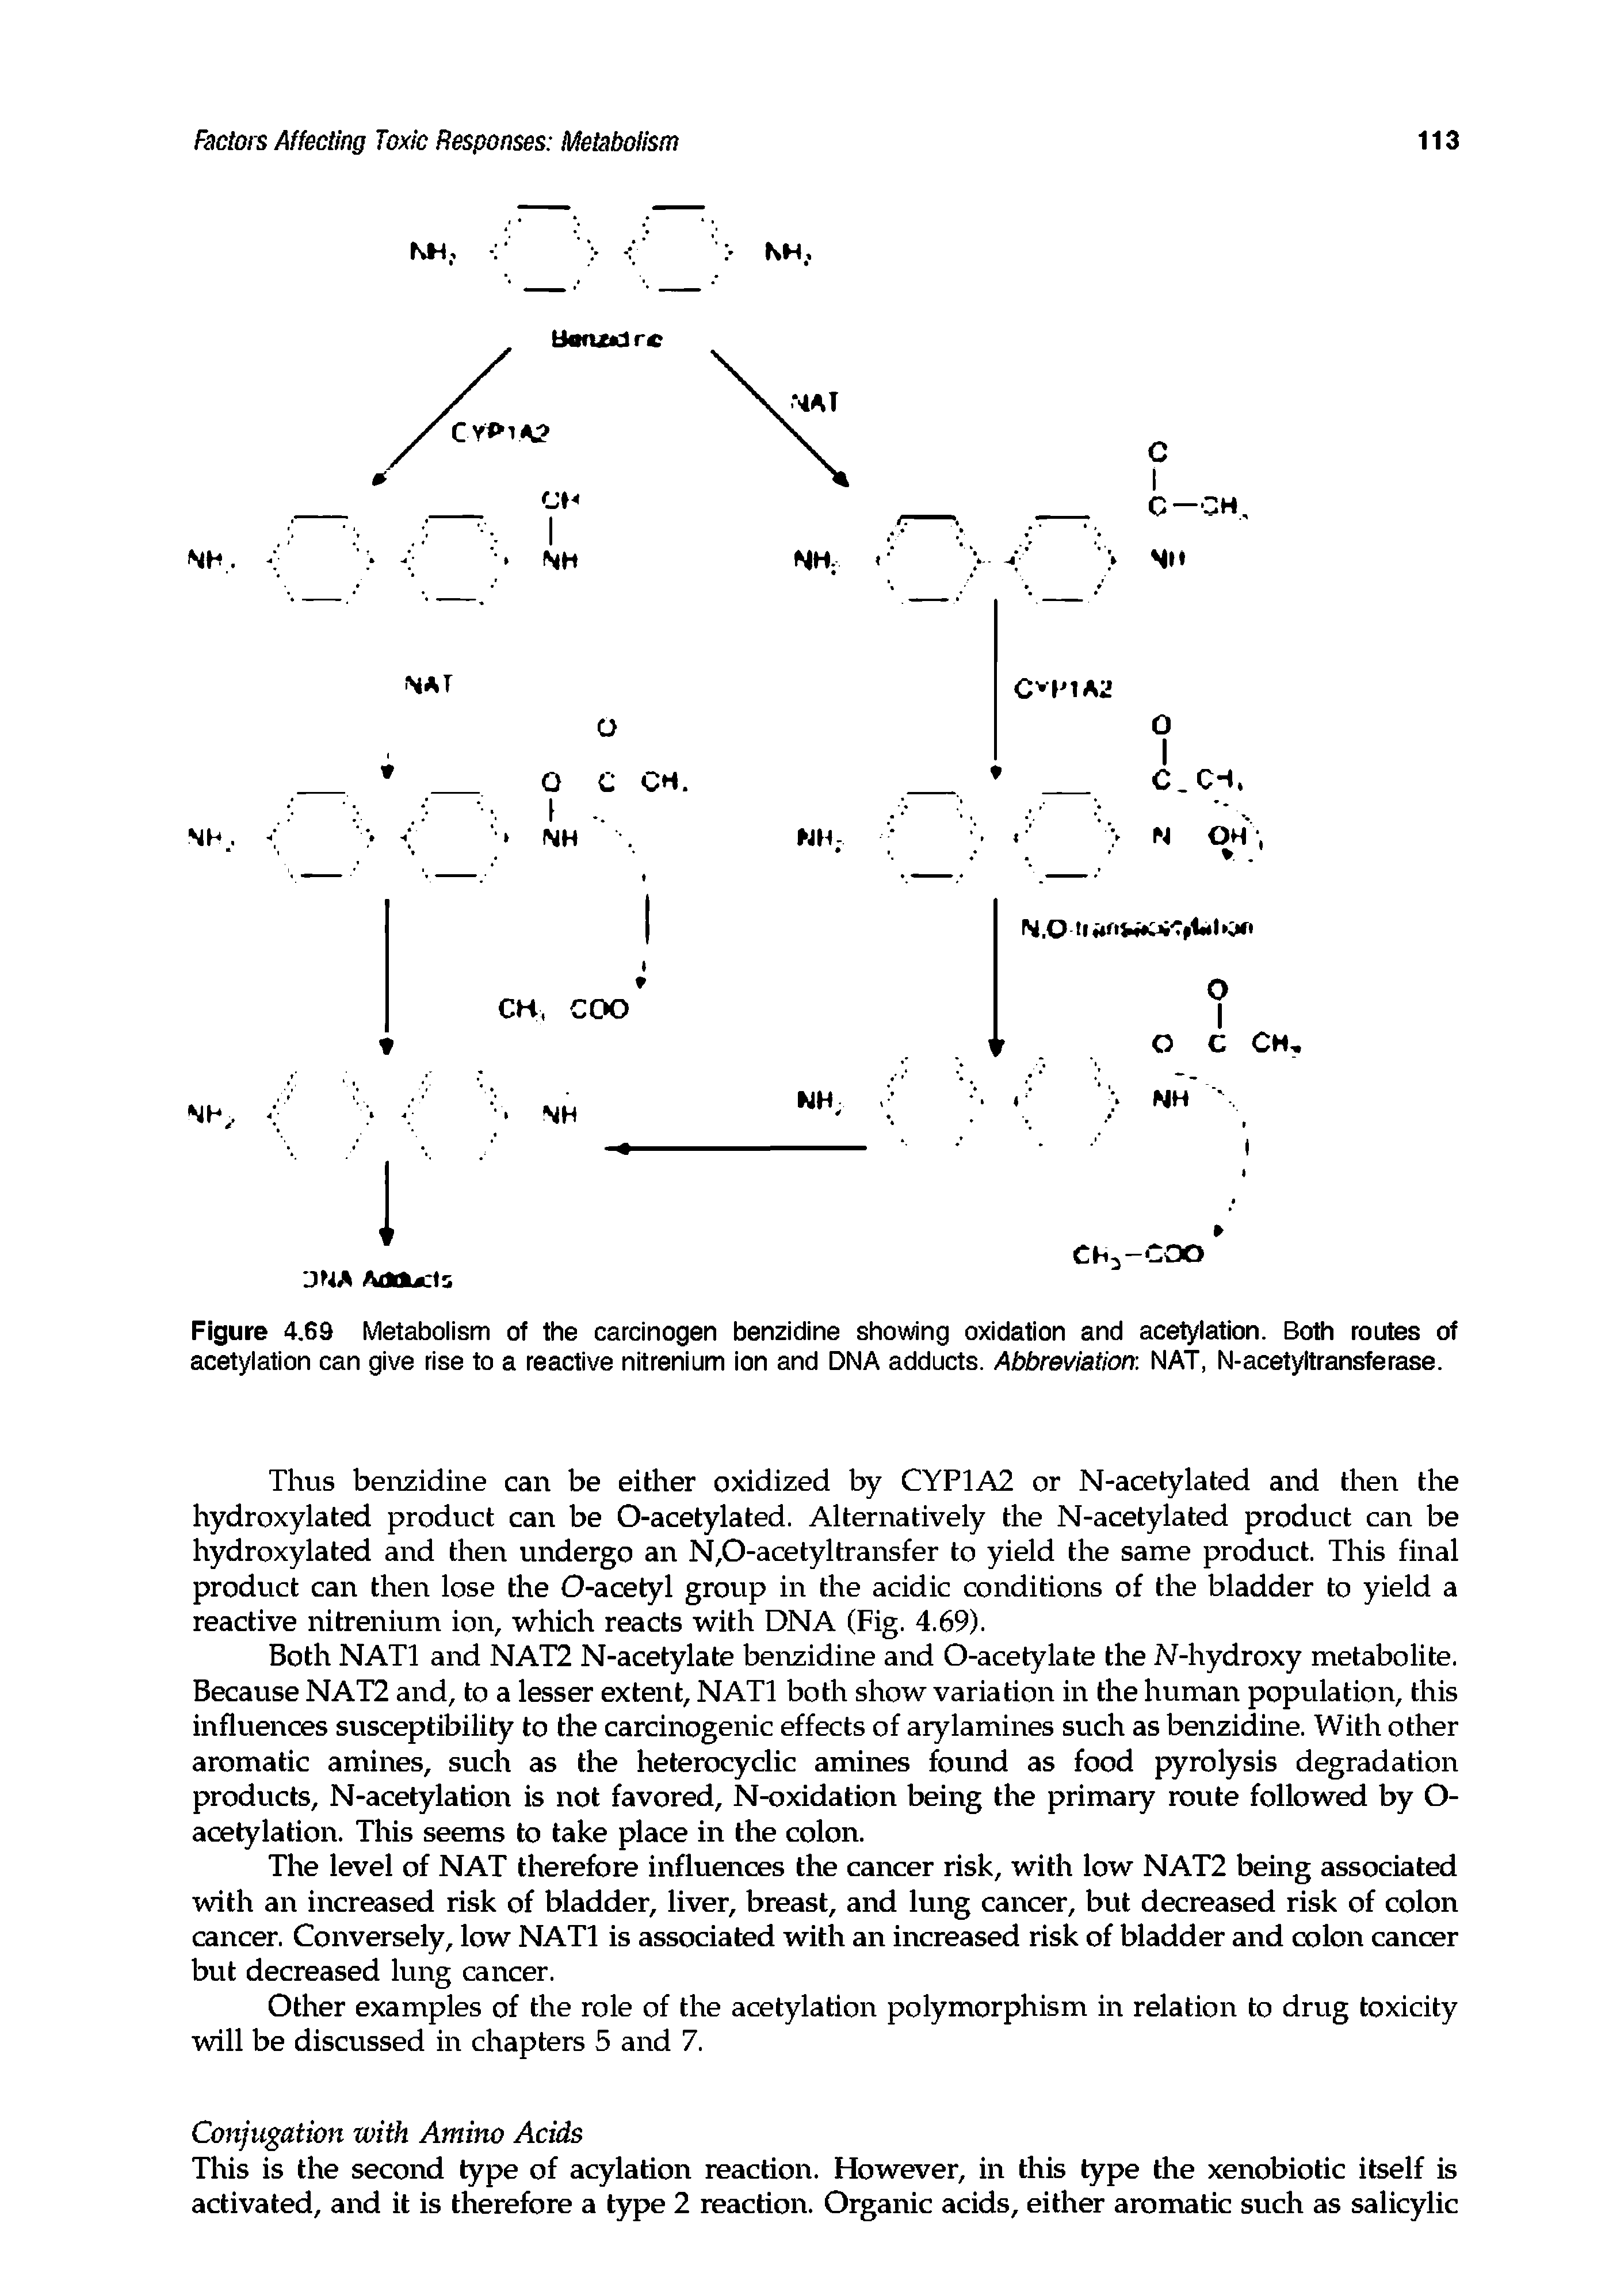 Figure 4.69 Metabolism of the carcinogen benzidine showing oxidation and acetylation. Both routes of acetylation can give rise to a reactive nitrenium ion and DNA adducts. Abbreviation. NAT, N-acetyltransferase.